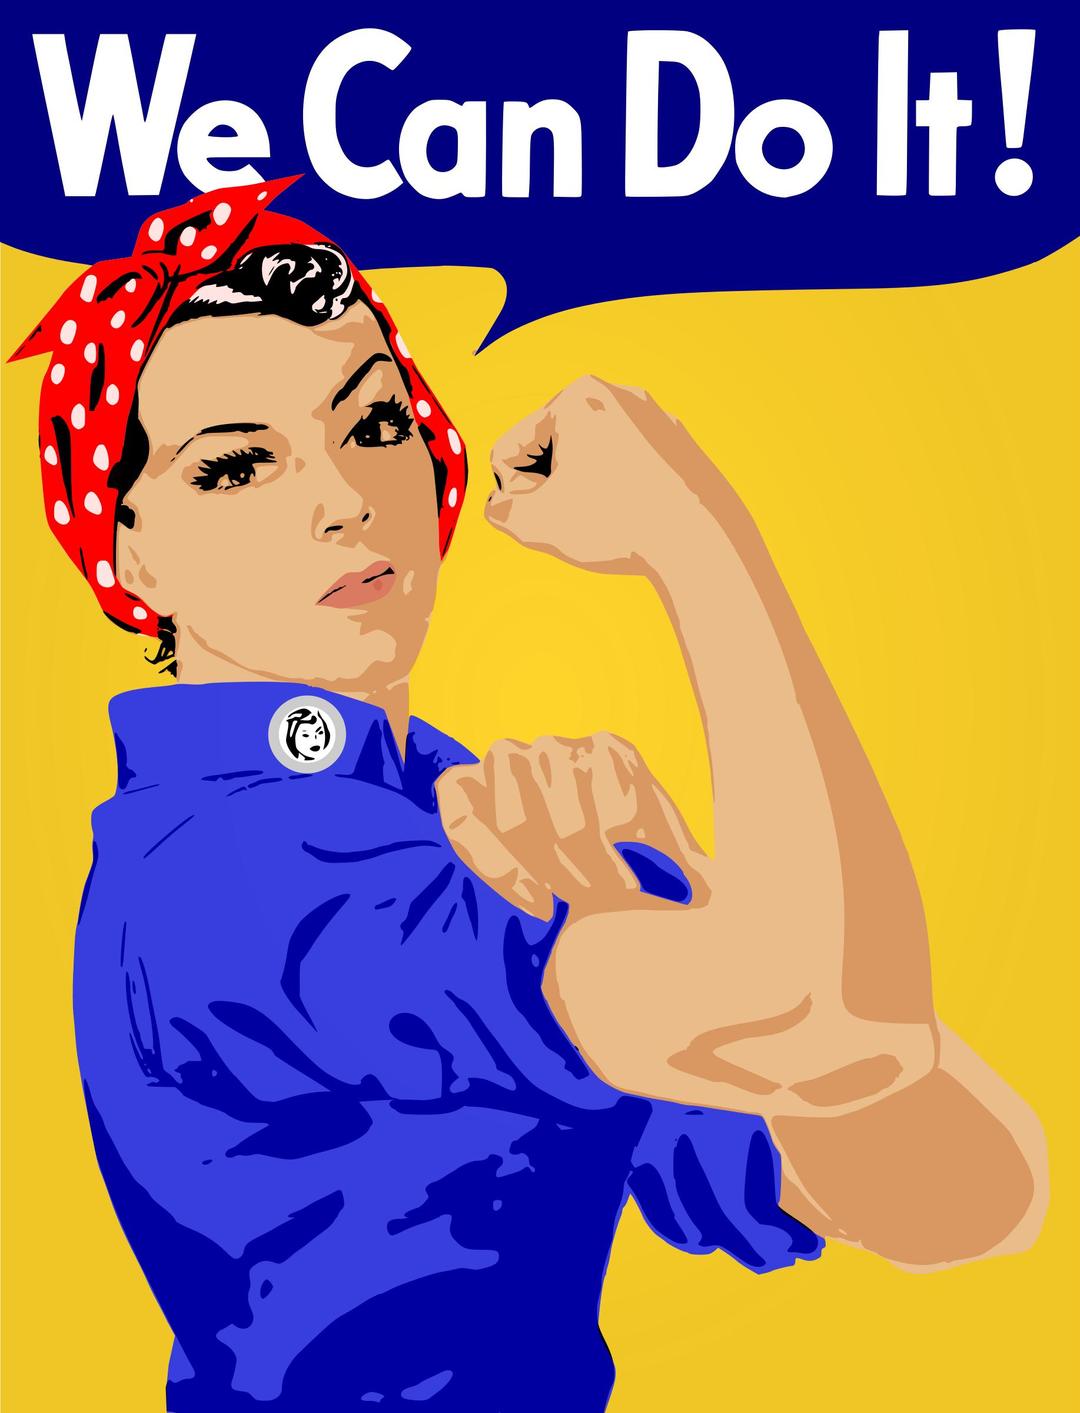 We Can Do It! Poster png transparent